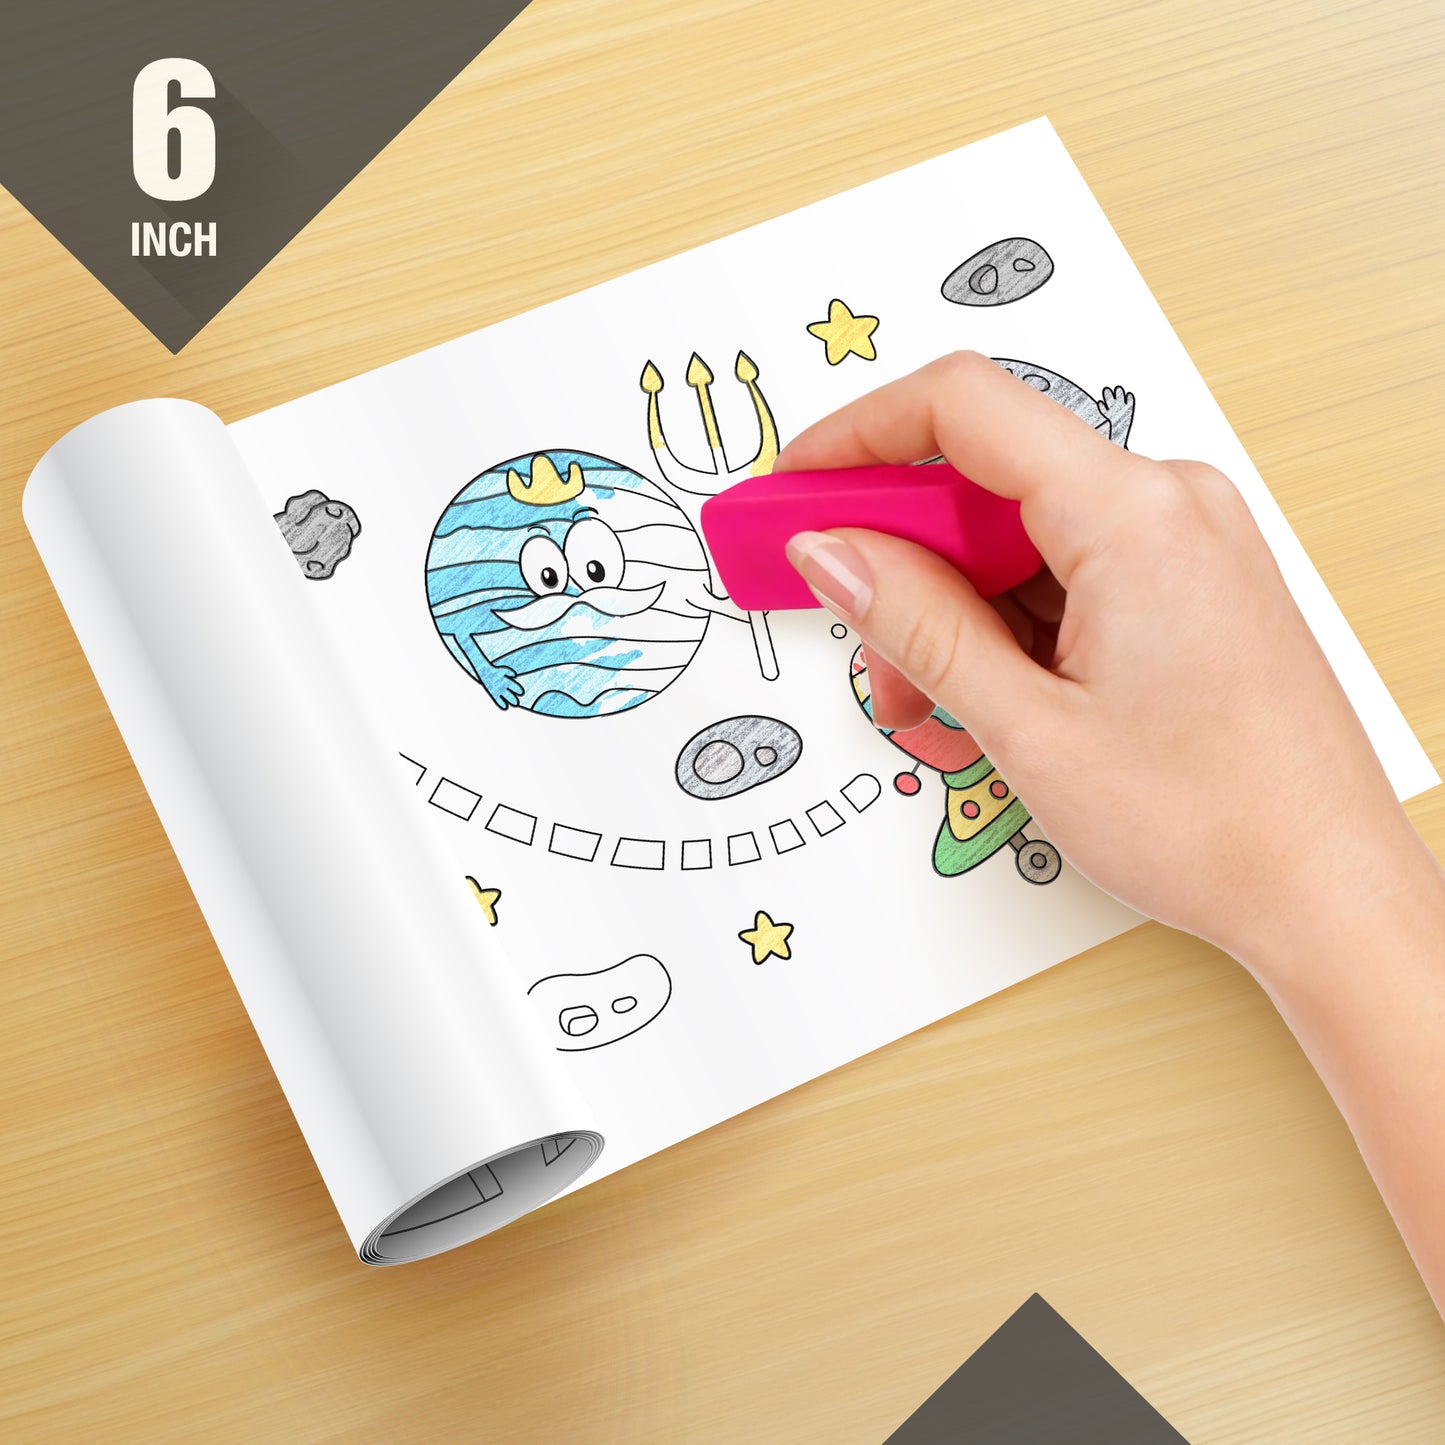 The image depicts a hand using an eraser to erase crayon marks in a coloring book.